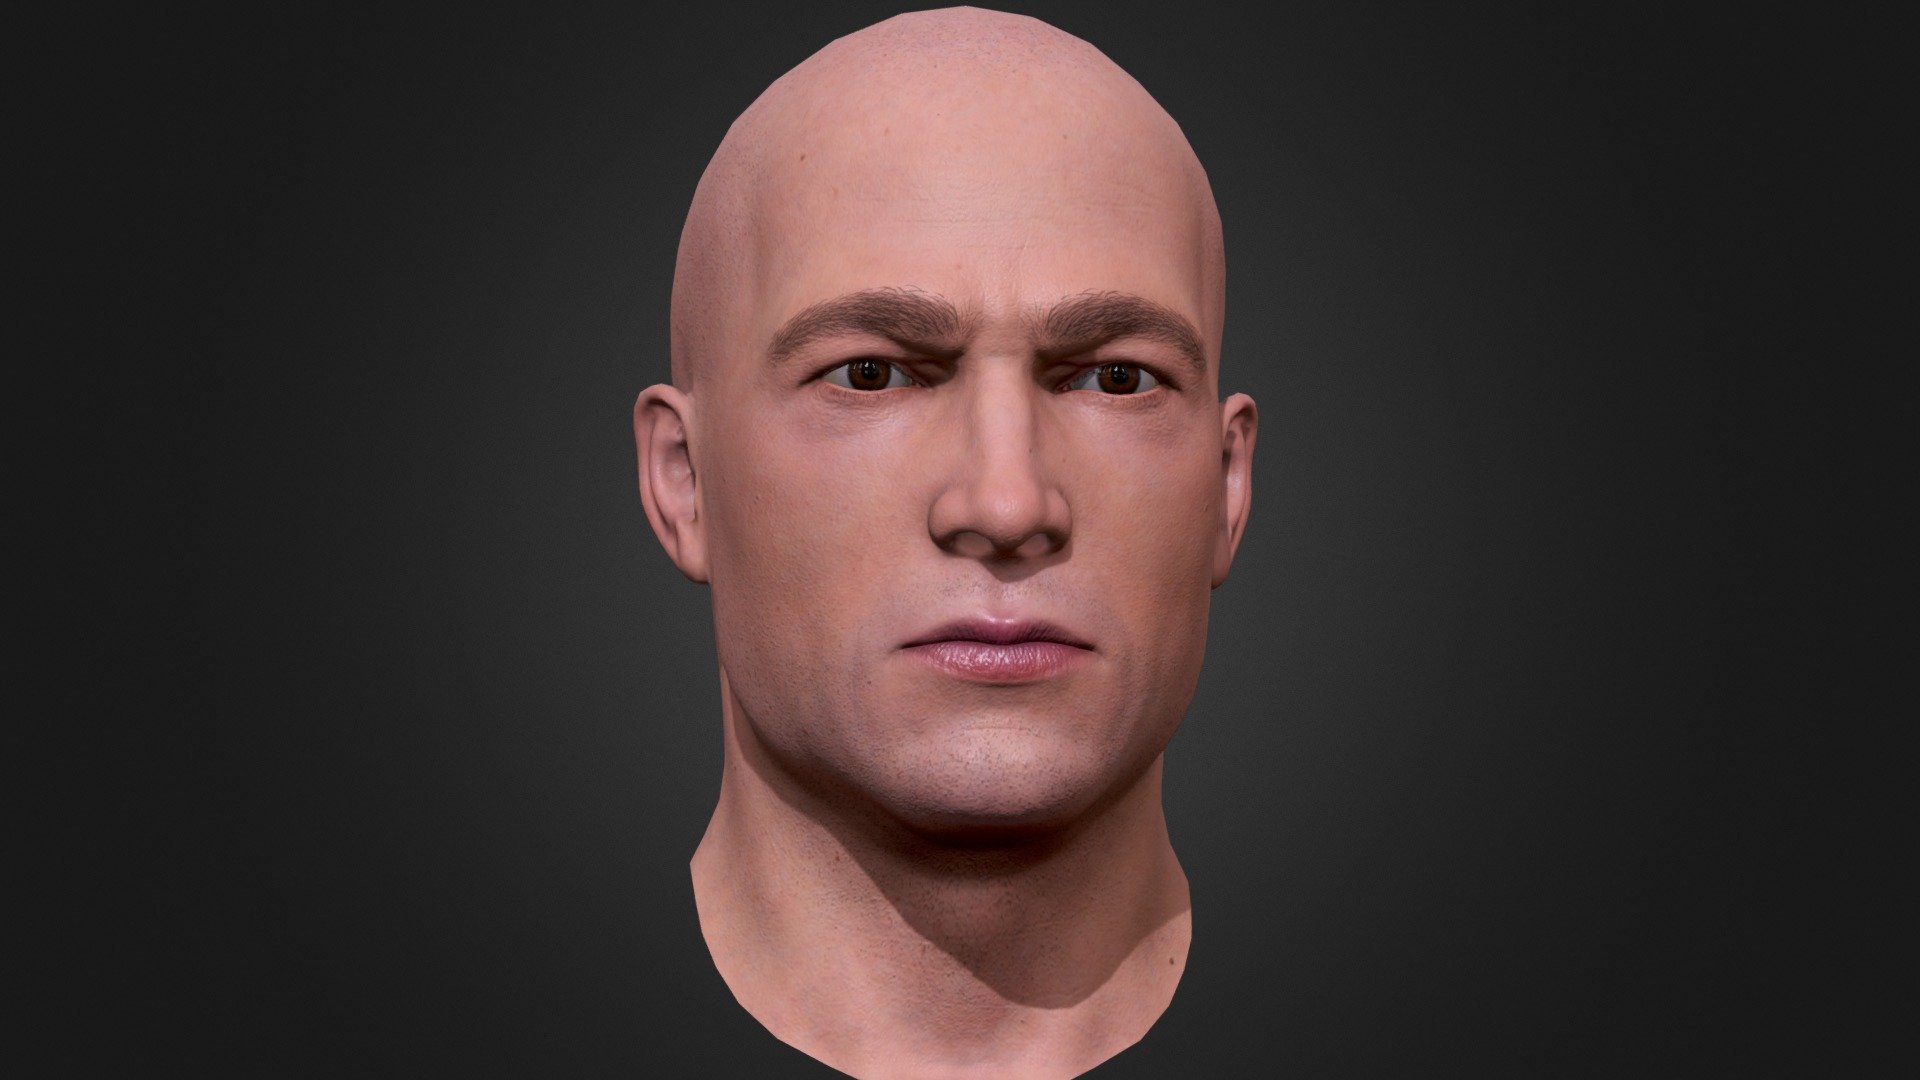 !(https://ibb.co/mTPbyVf)       !(https://ibb.co/wQk9M3v)



3d model of realistic head for game engines or other animation projects. The topology was created for high-quality animation of the face;



Textures with a resolution of 4k, 2k , 1k;



Additionally included are low poly jaw, tongue;



Textures include: Base_Color,Displacement,Ambient_occlusion,Emissive,Height,Normal_OpenGL,Roughness and others;



Blender 2.93 file;



Marmoset Toolbag 3 demo scene;



fbx, .obj;



Verts: 7,590; Tris: 14,736;


 - Soldier head - 01 - 3D model by Davlet 3d model